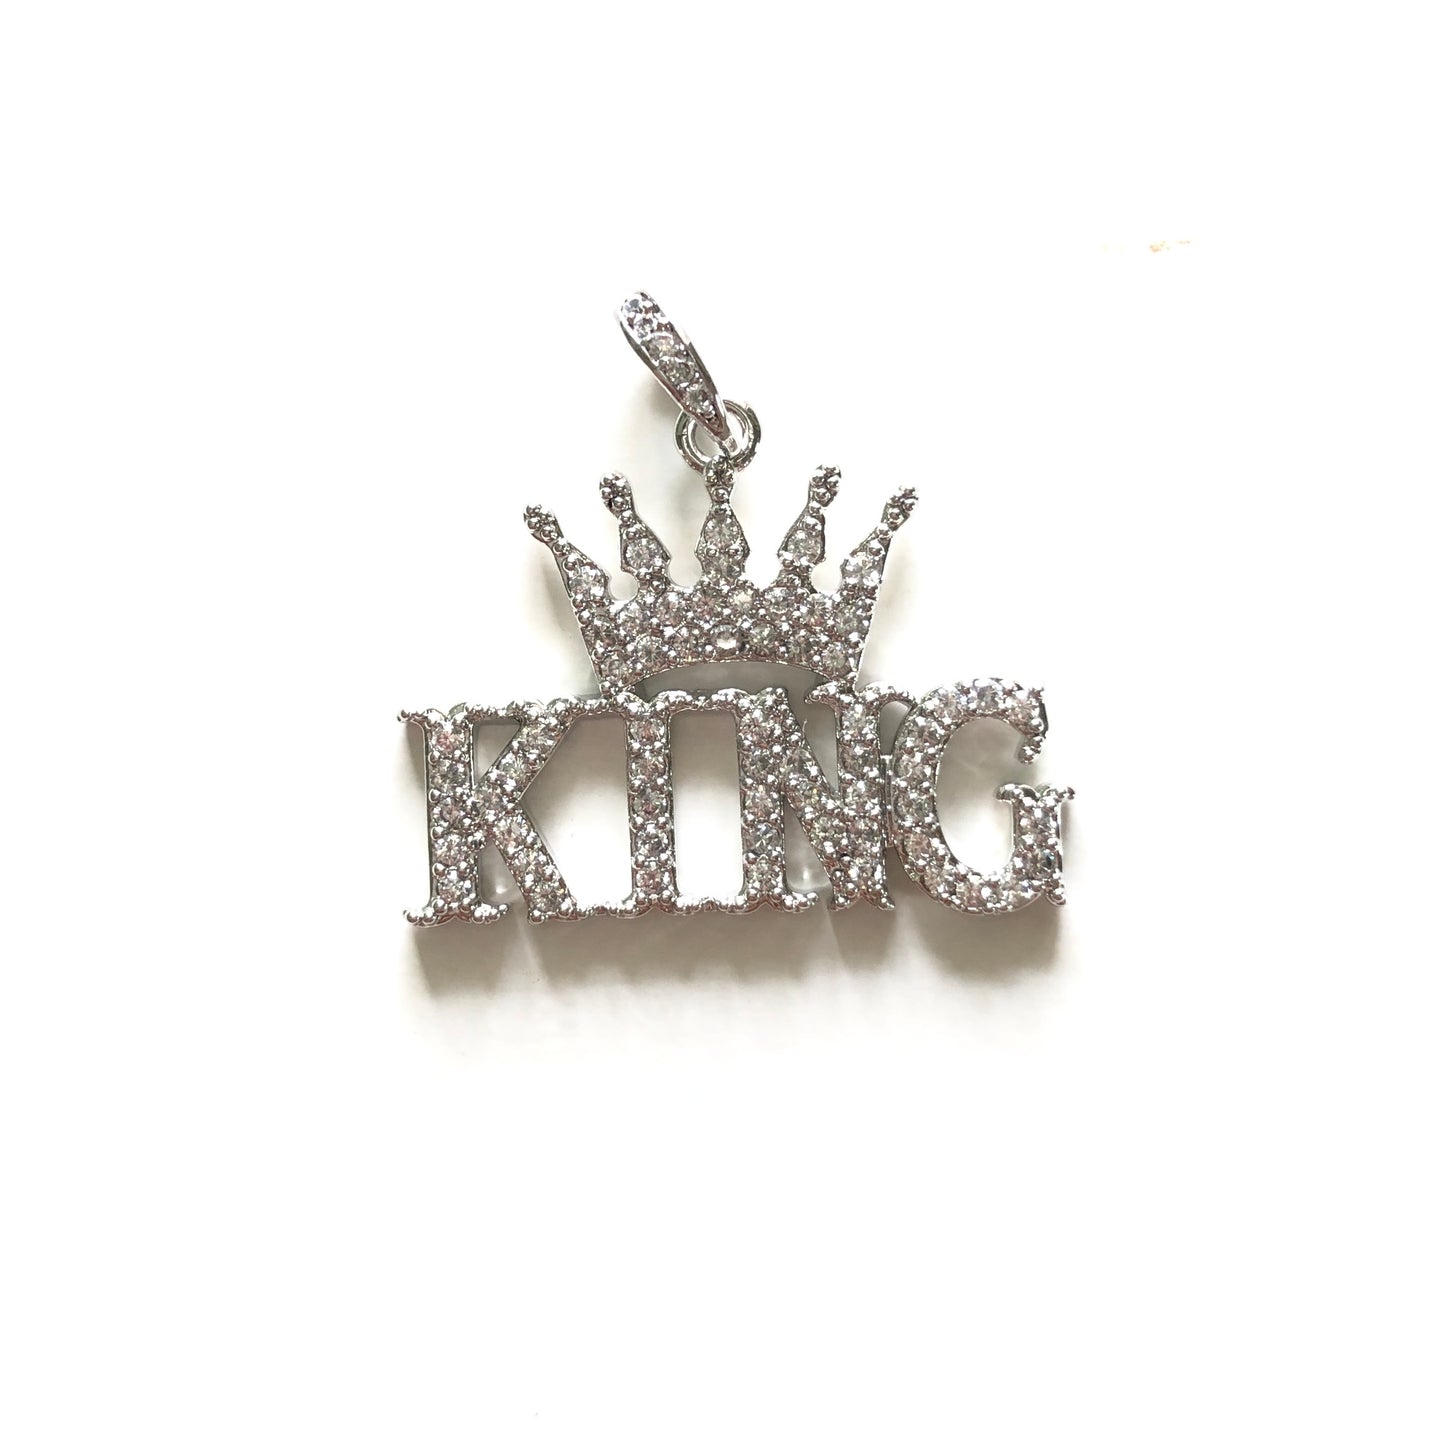 10pcs/lot 15*7mm CZ Paved Number Charms-Medium Size| Charms | Charms Beads Beyond 10 Silver Numbers